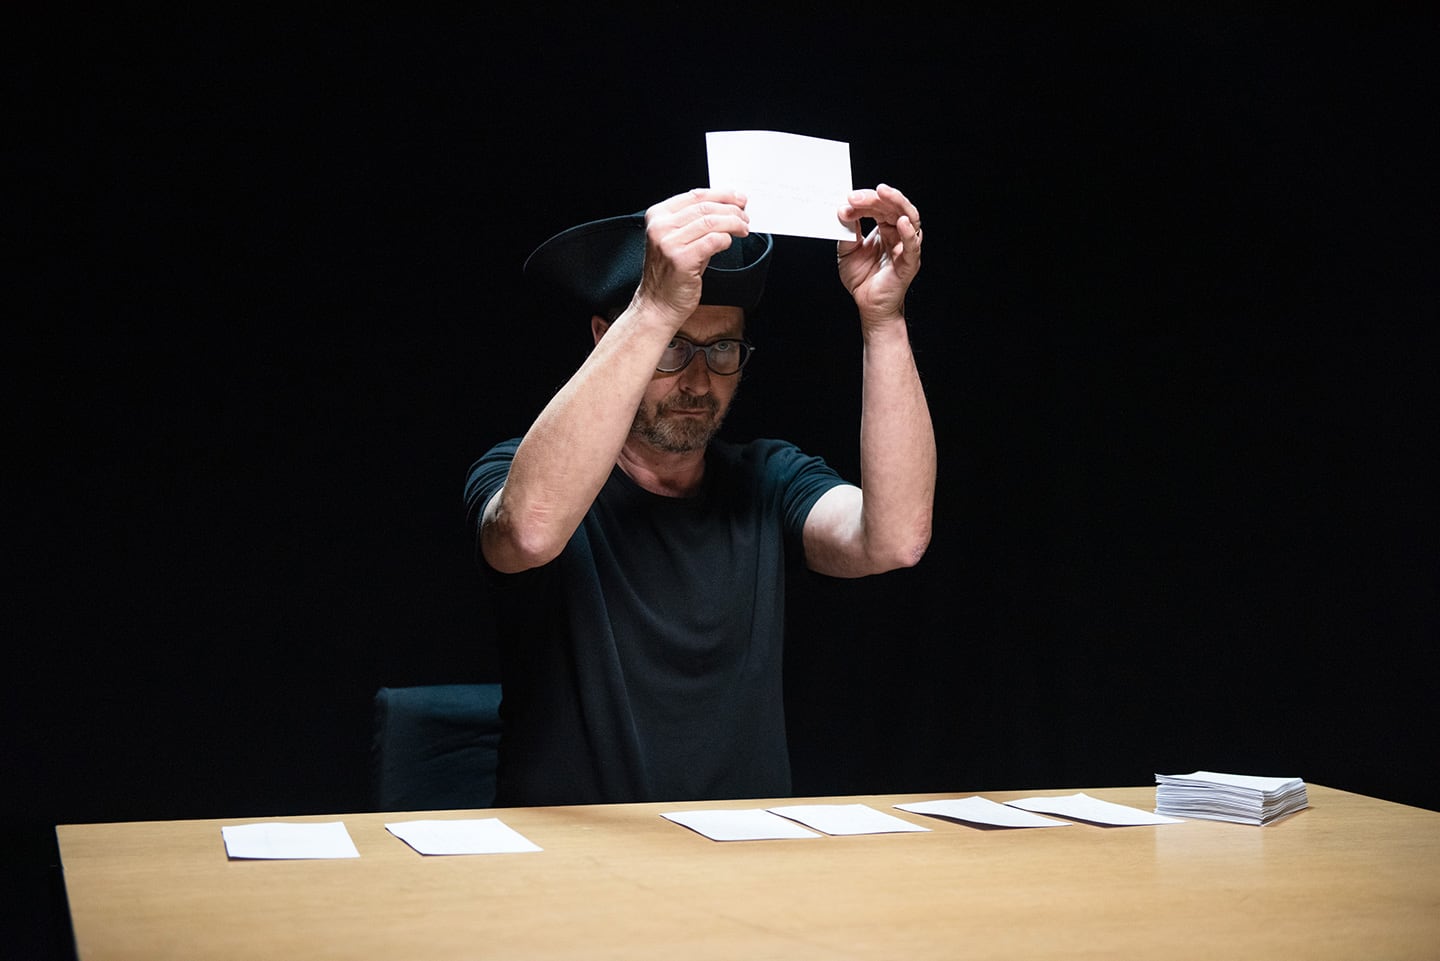 Bespactacled man in pirate hat holds up a blank card from a row of blank cards dealt on the table before him